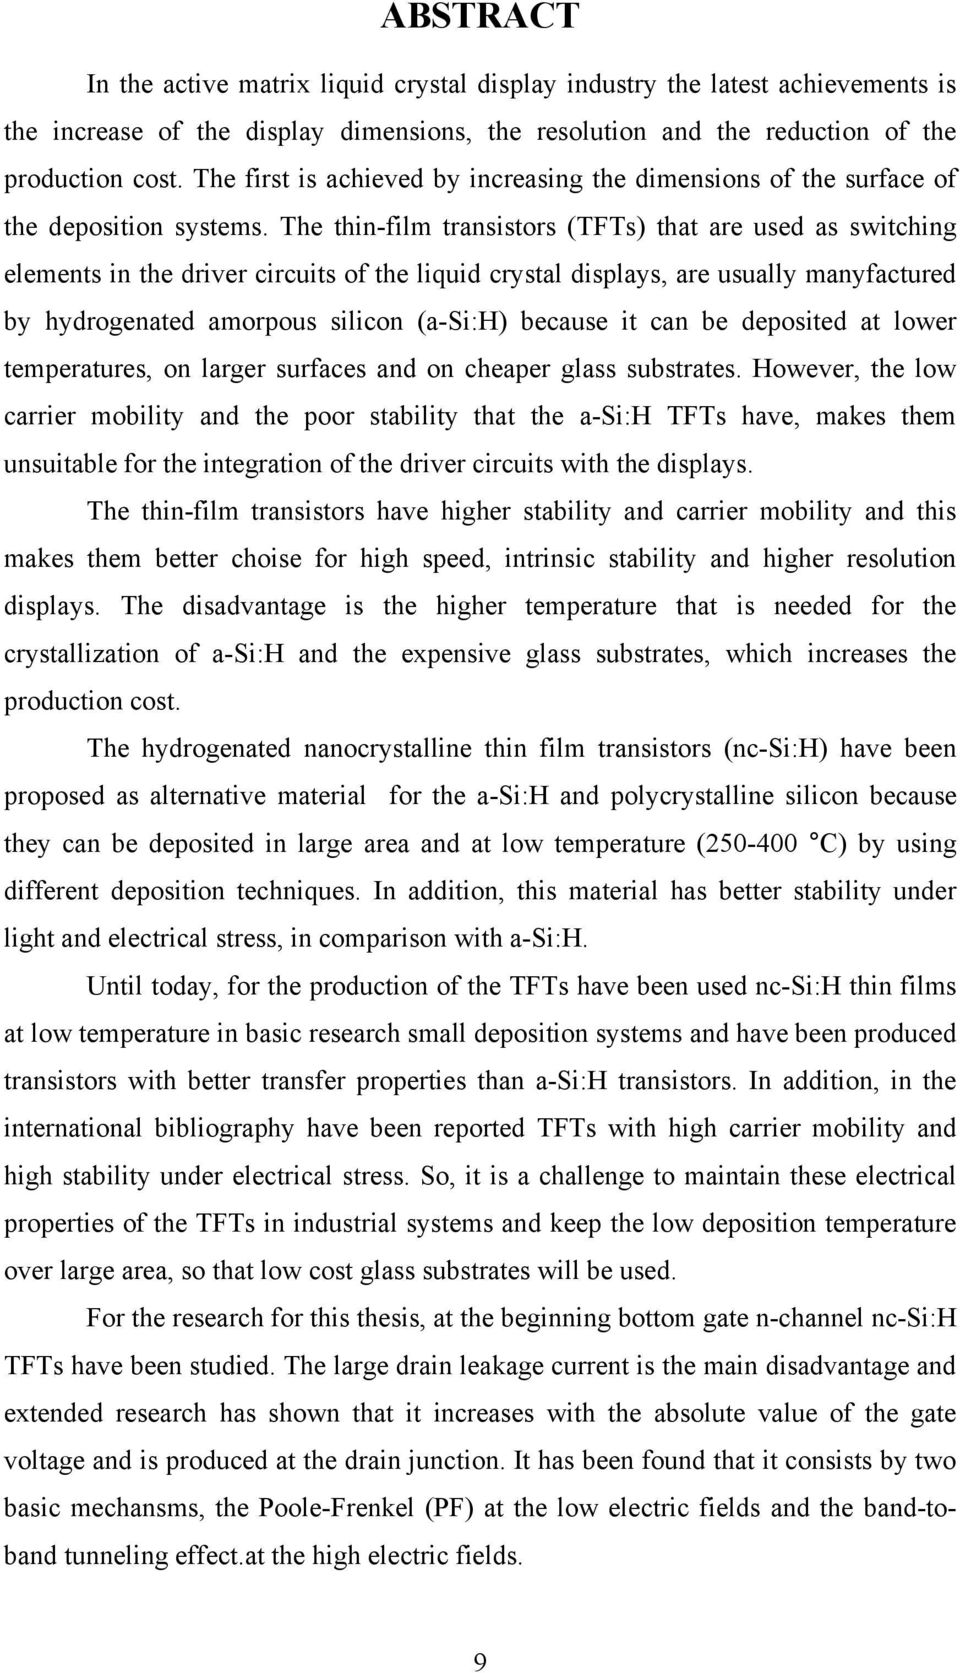 The thin-film transistors (TFTs) that are used as switching elements in the driver circuits of the liquid crystal displays, are usually manyfactured by hydrogenated amorpous silicon (a-si:h) because